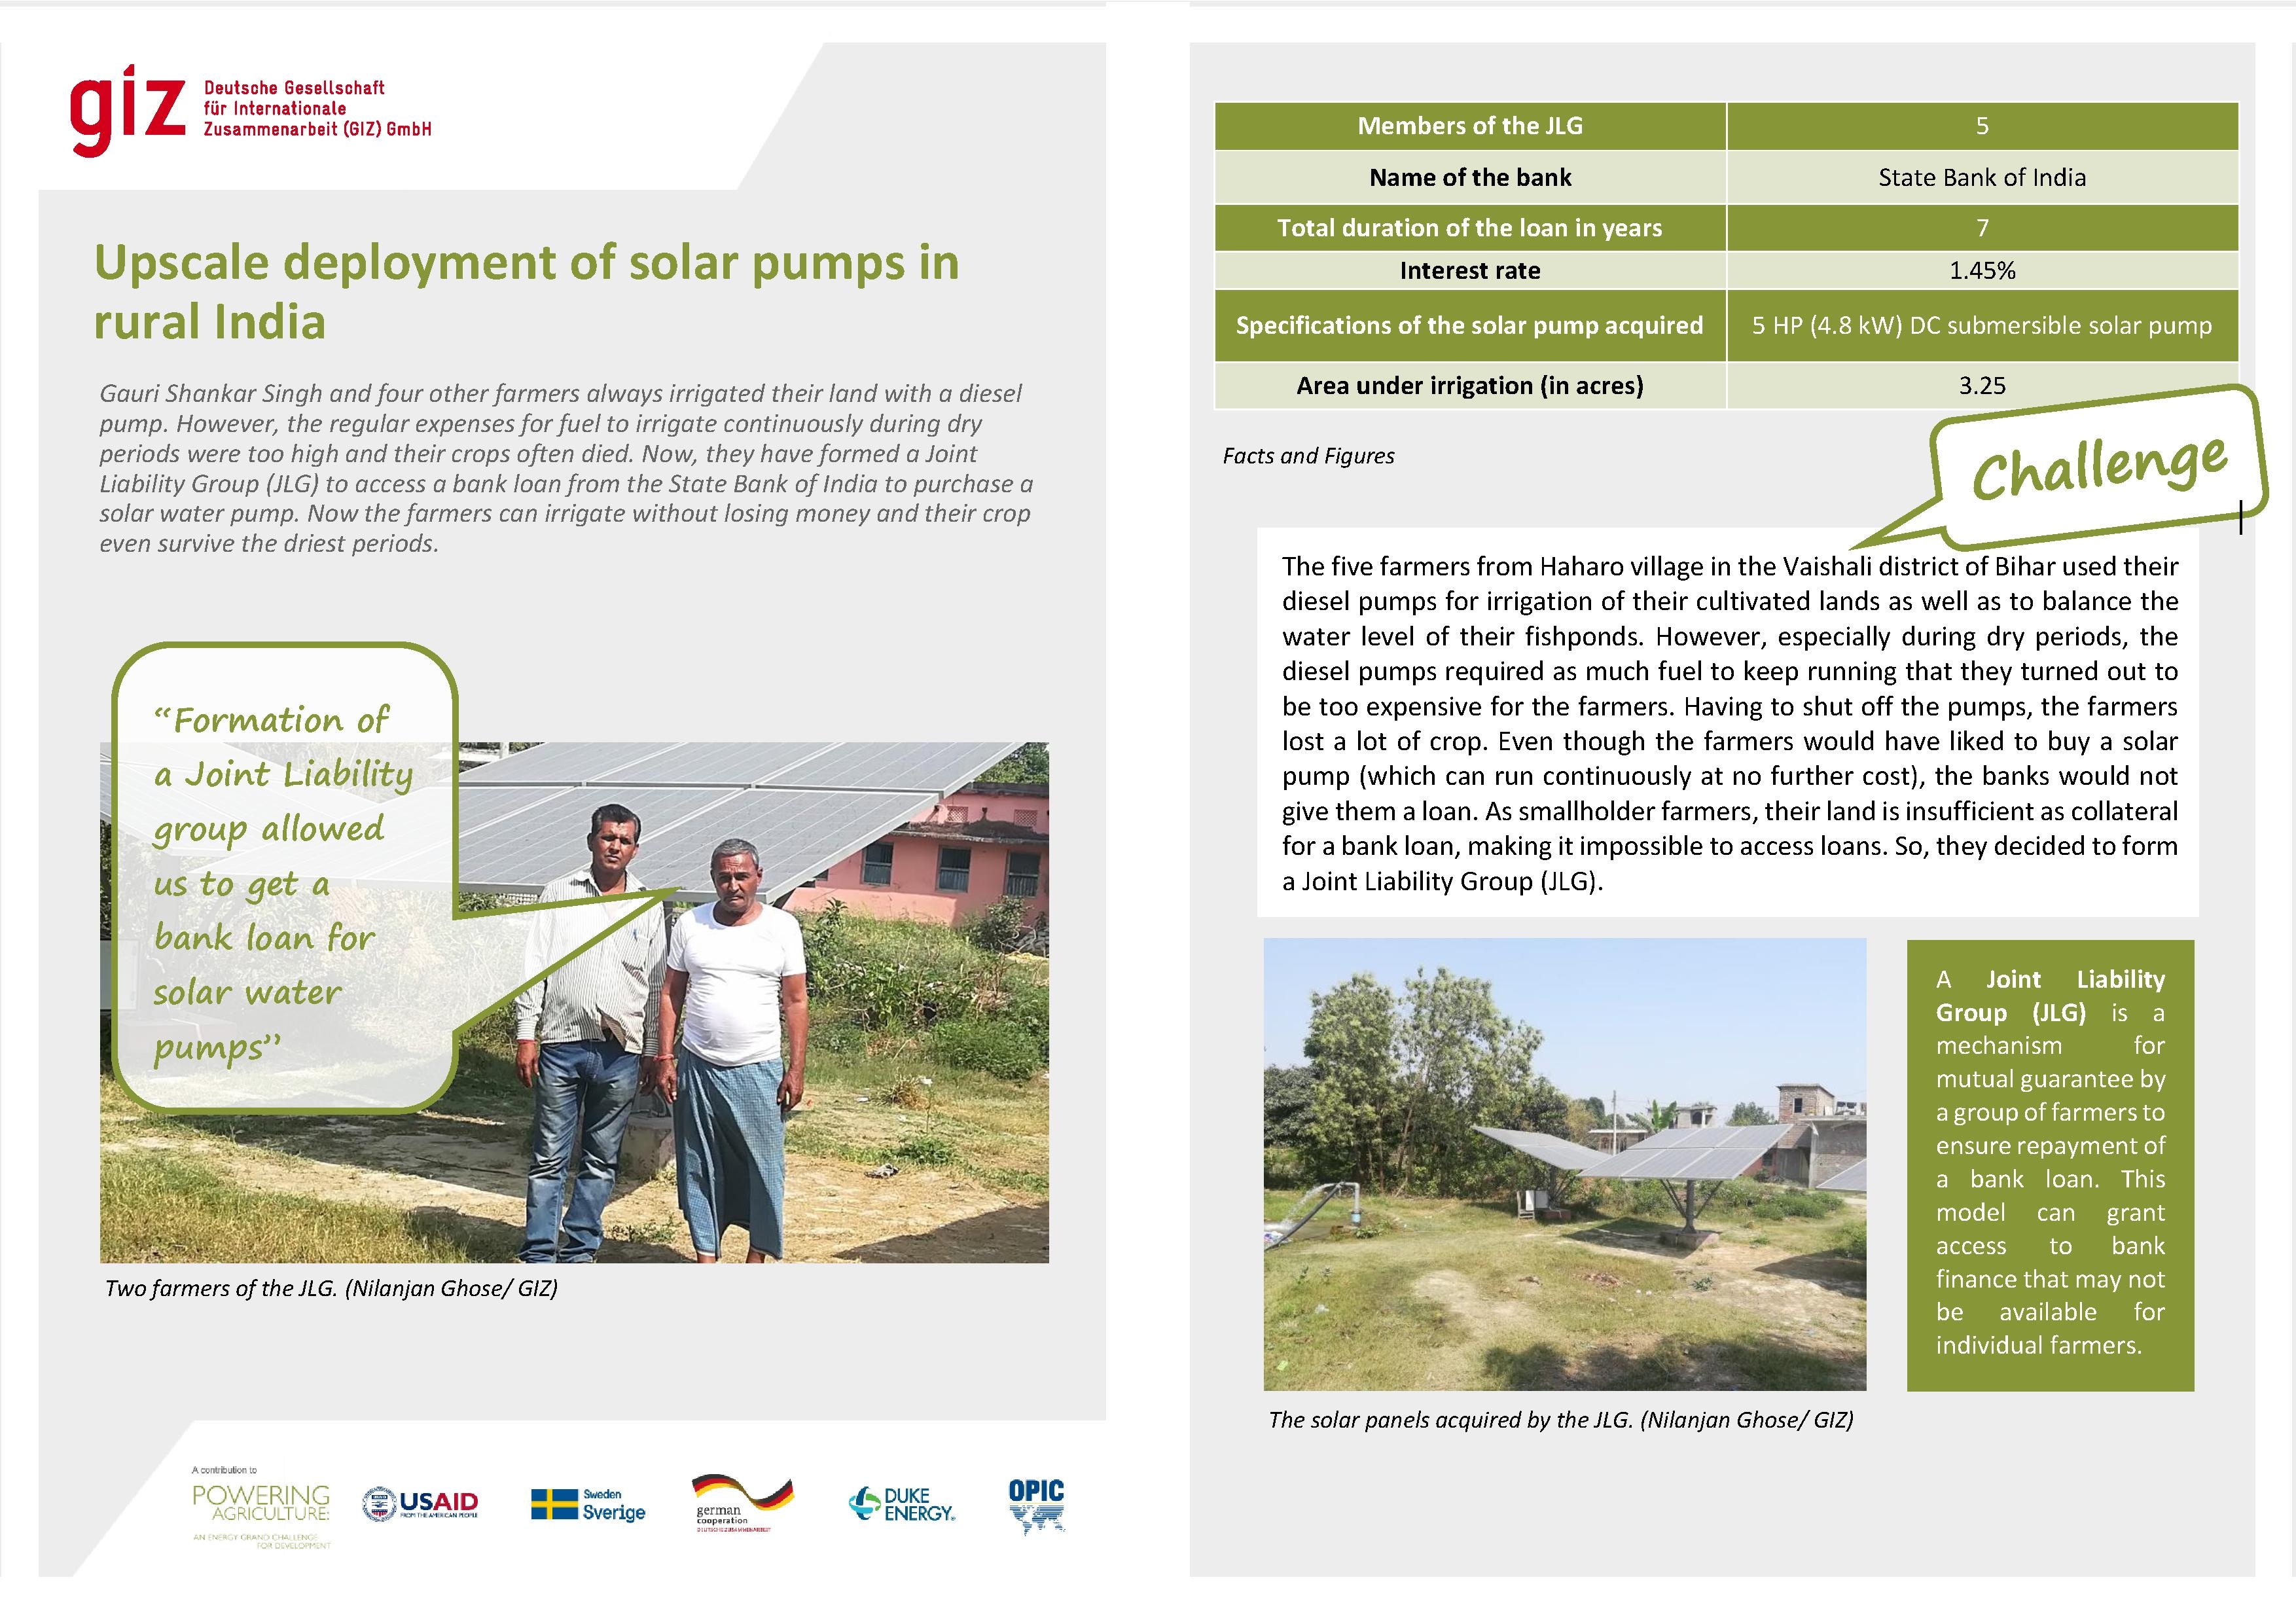 Story Sheet: Upscale deployment of solar pumps in rural India